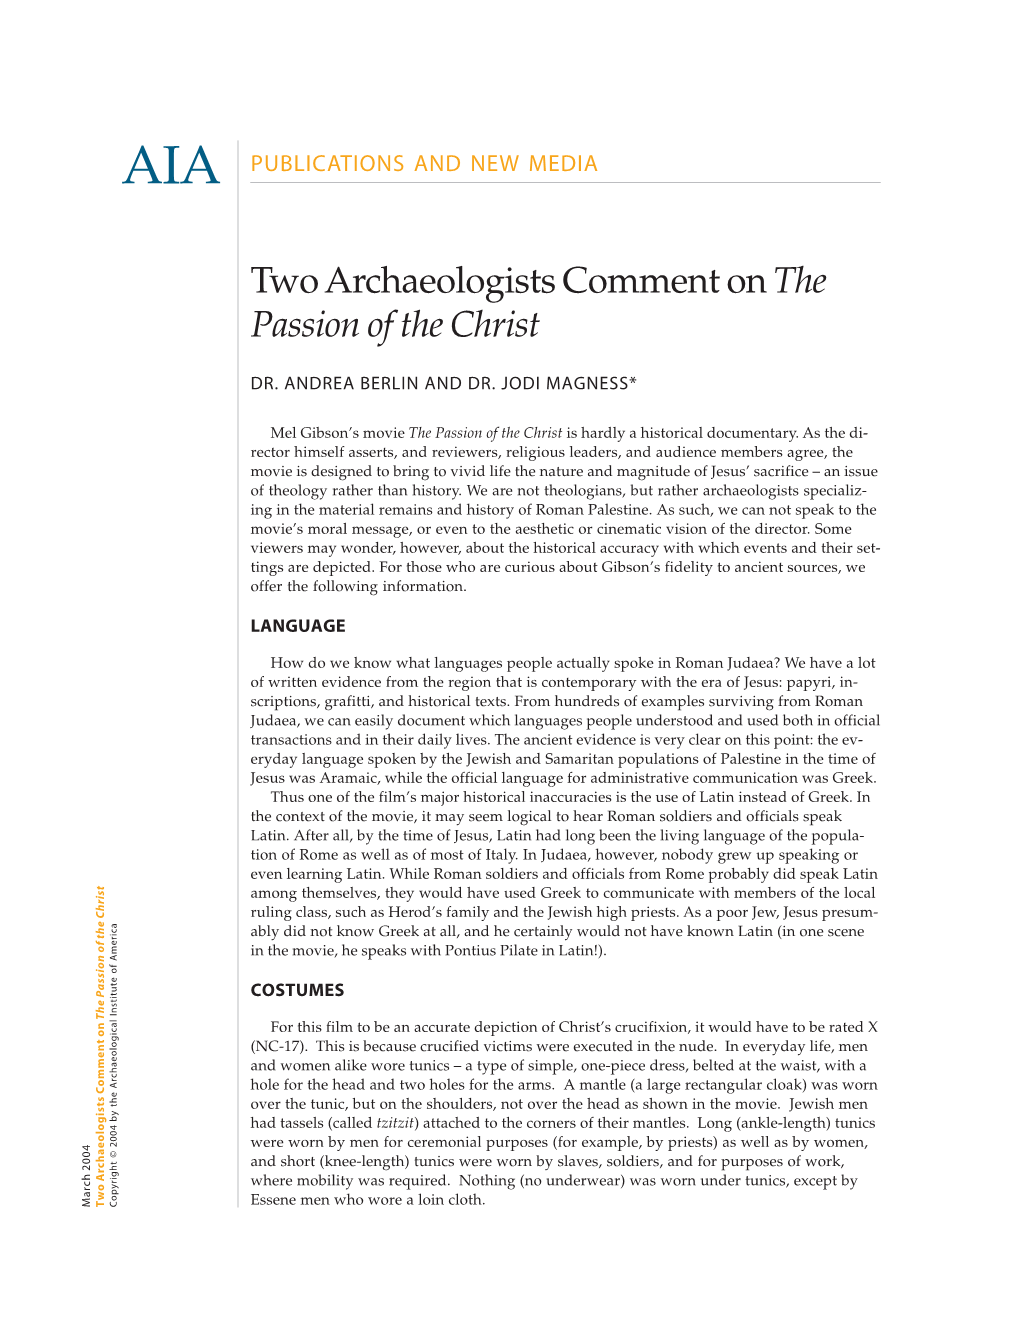 Two Archaeologists Comment on the Passion of the Christ